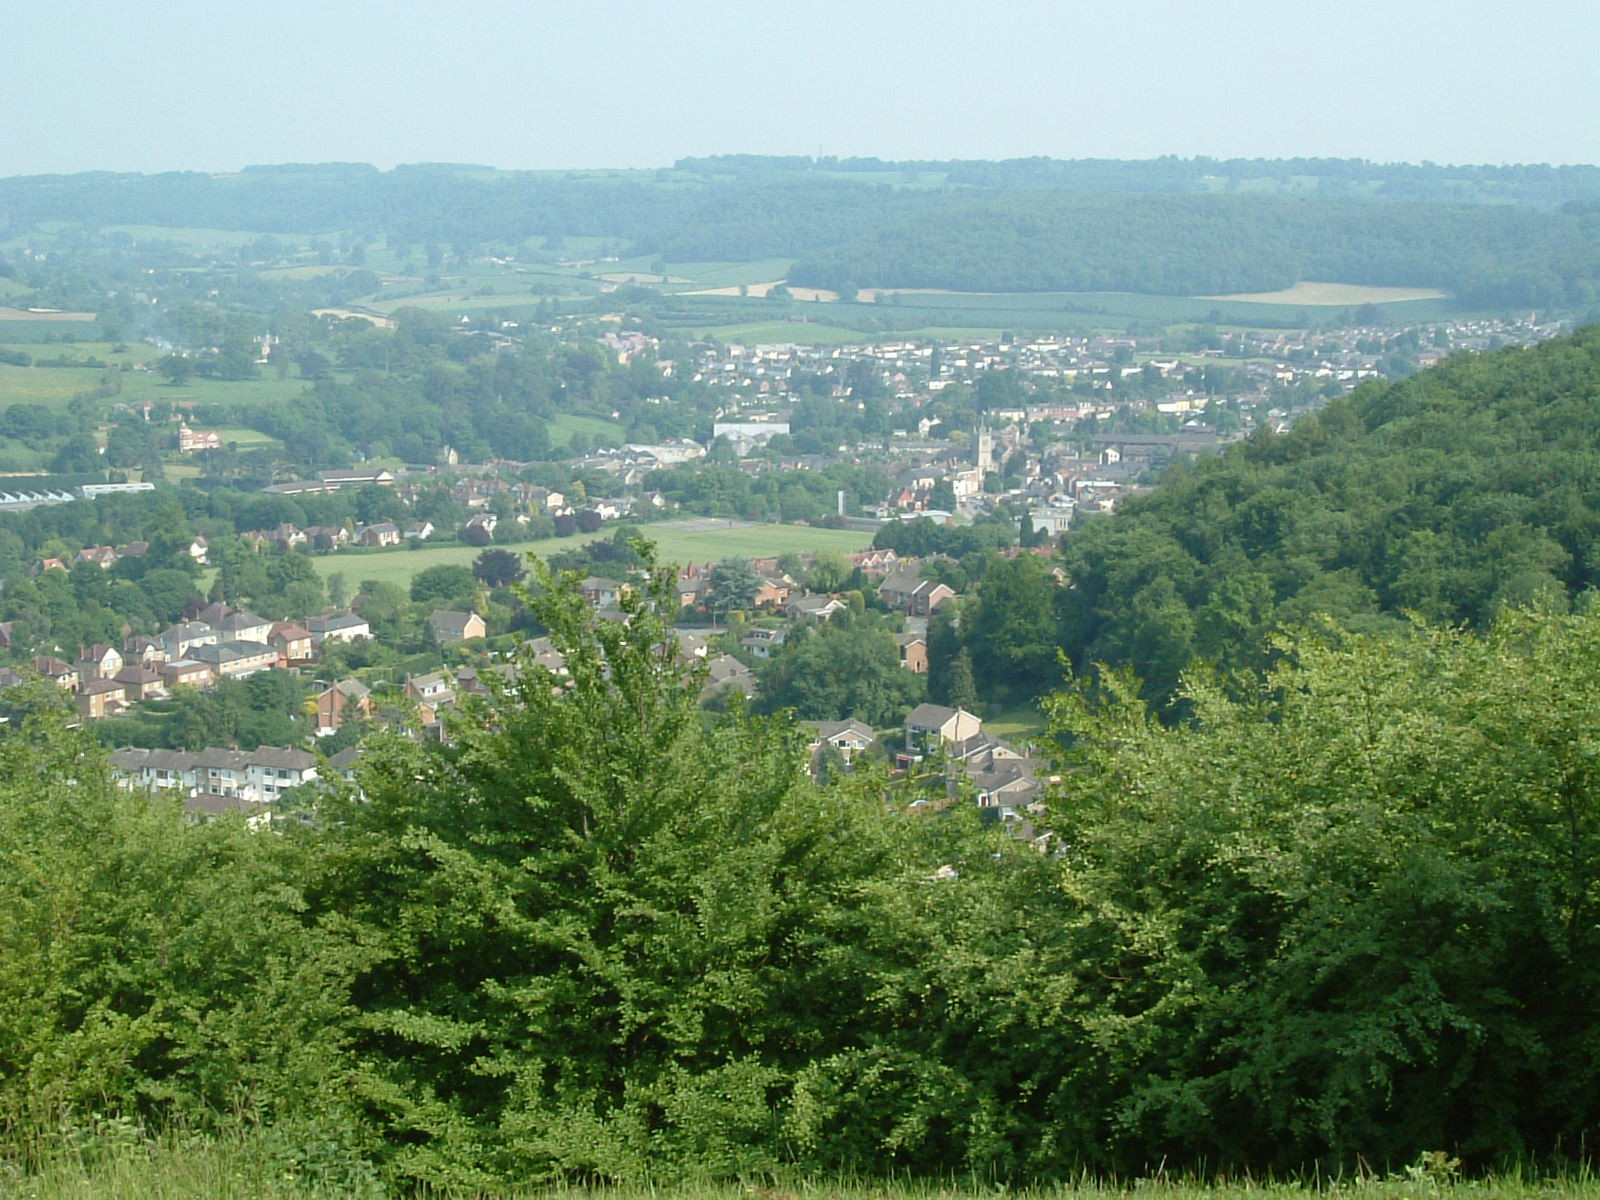 Dursley as seen from Stinchcombe Hill